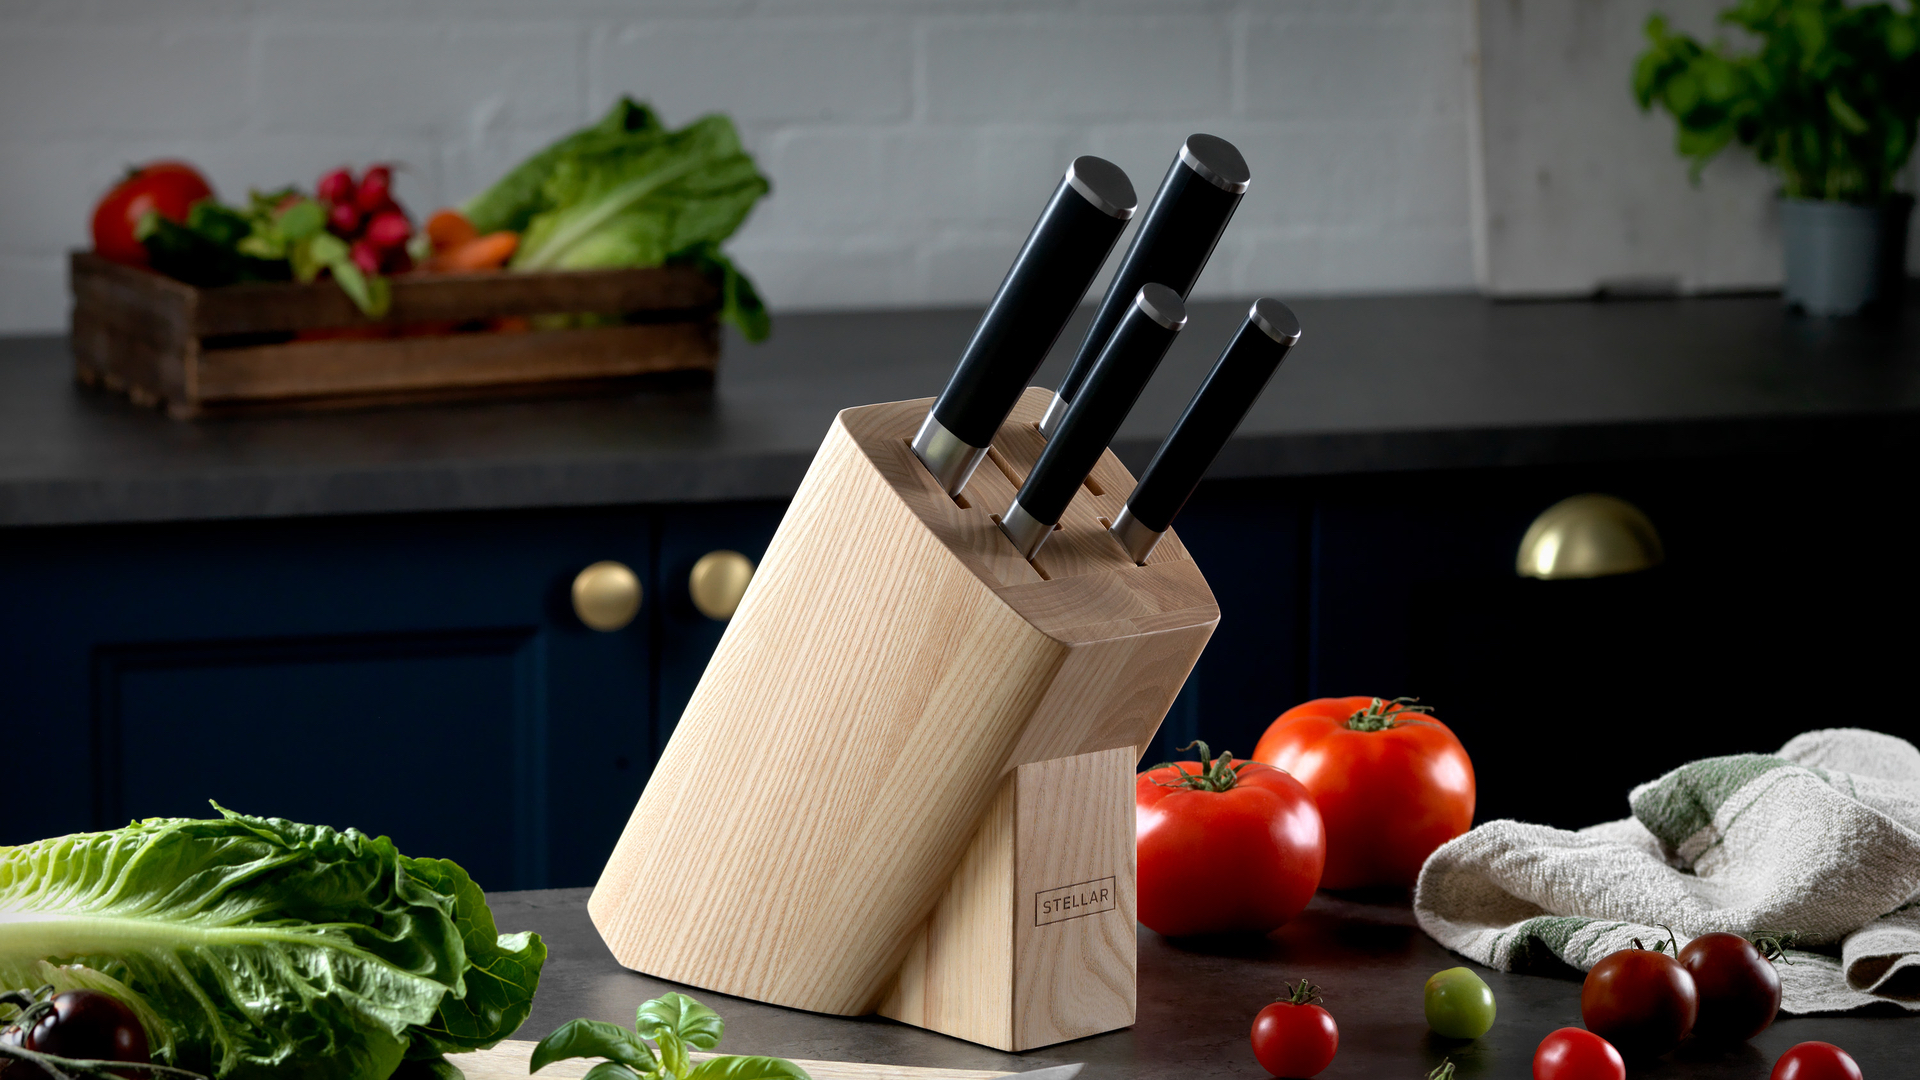 Automatic Cutting Board and Knife Set with Stand, Knife Block Holder, Smart  A